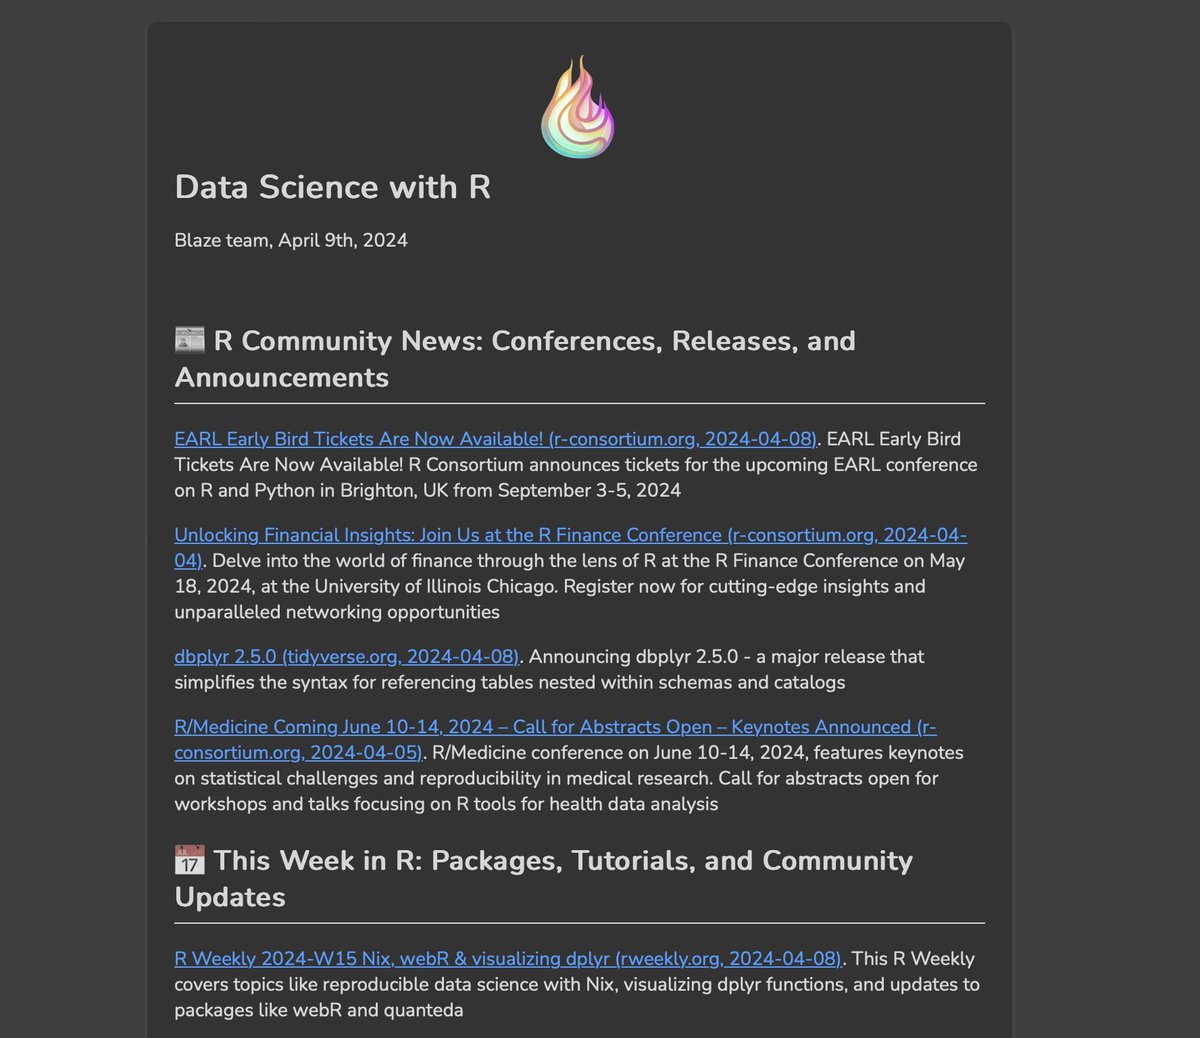 Data science with #rstats newsletter digest (9th April) is out! ✨ preview pdf @ tinyurl.com/blaze-r-weekly 📷 subscribe (free) @ getblaze.email